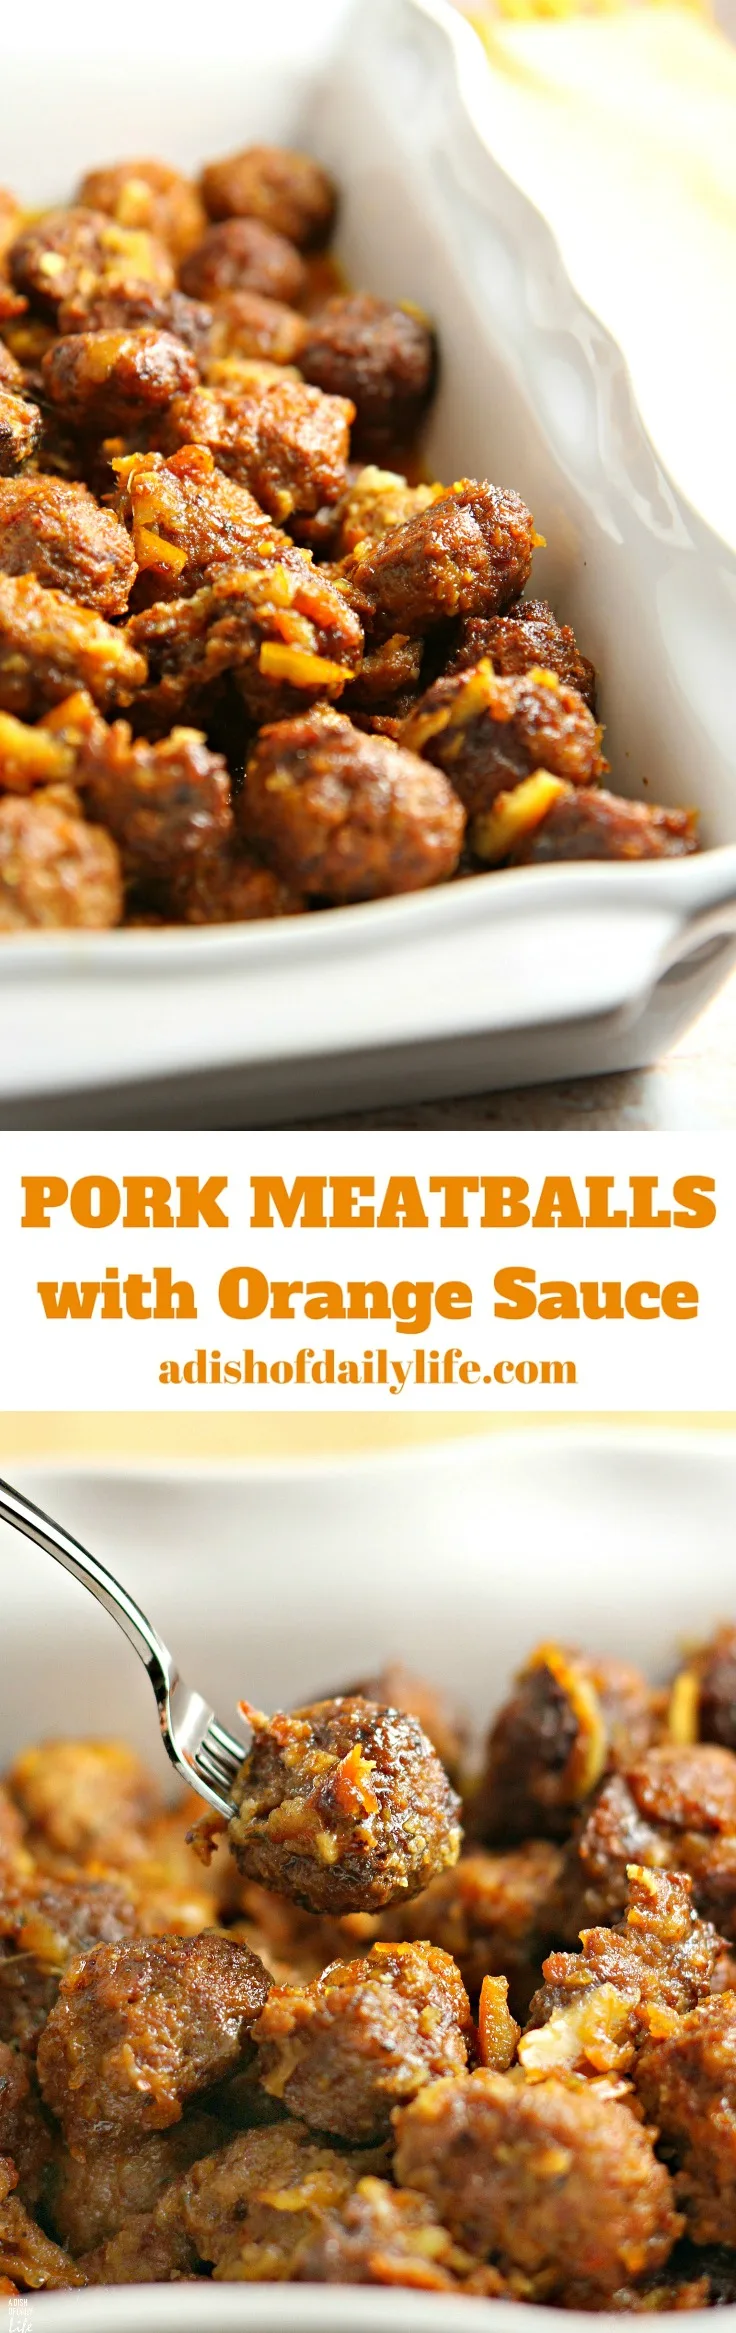 Slow Cooker Pork Meatballs with Orange Sauce...tender, juicy meatballs, packed with vegetables, covered with an orange glaze that everyone goes crazy for! Great as a party appetizer recipe, or delicious easy dinner with rice! Leftovers freeze well. 